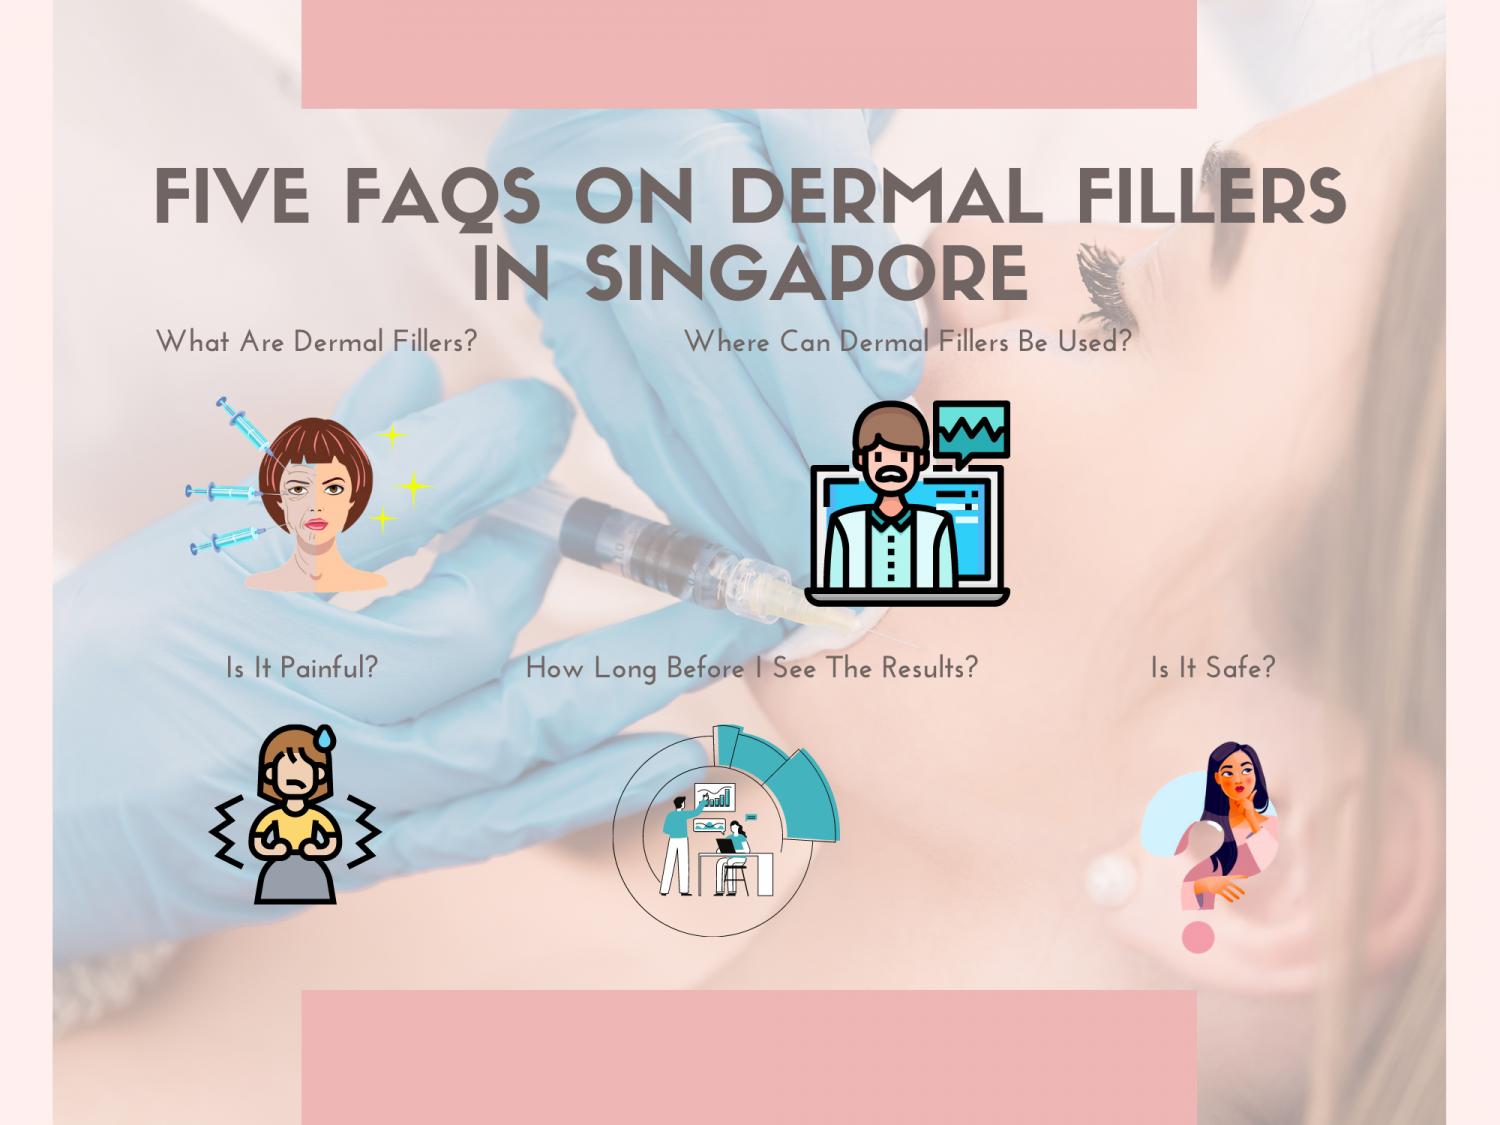 Five FAQs on Dermal Fillers in Singapore Infographic